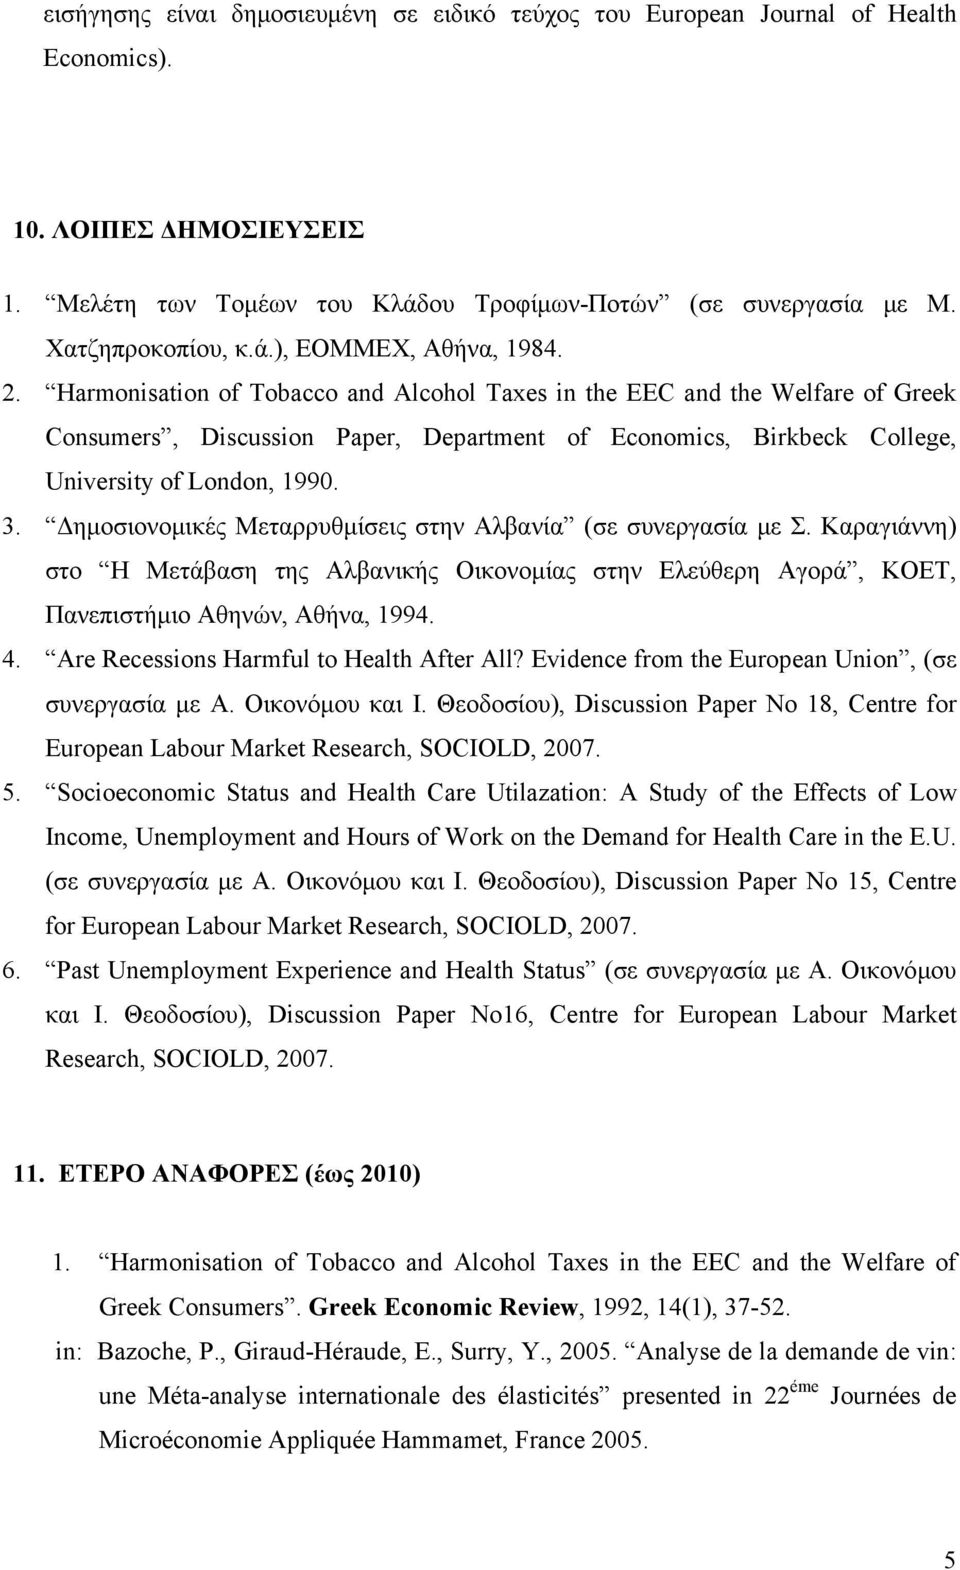 Harmonisation of Tobacco and Alcohol Taxes in the EEC and the Welfare of Greek Consumers, Discussion Paper, Department of Economics, Birkbeck College, University of London, 1990. 3.